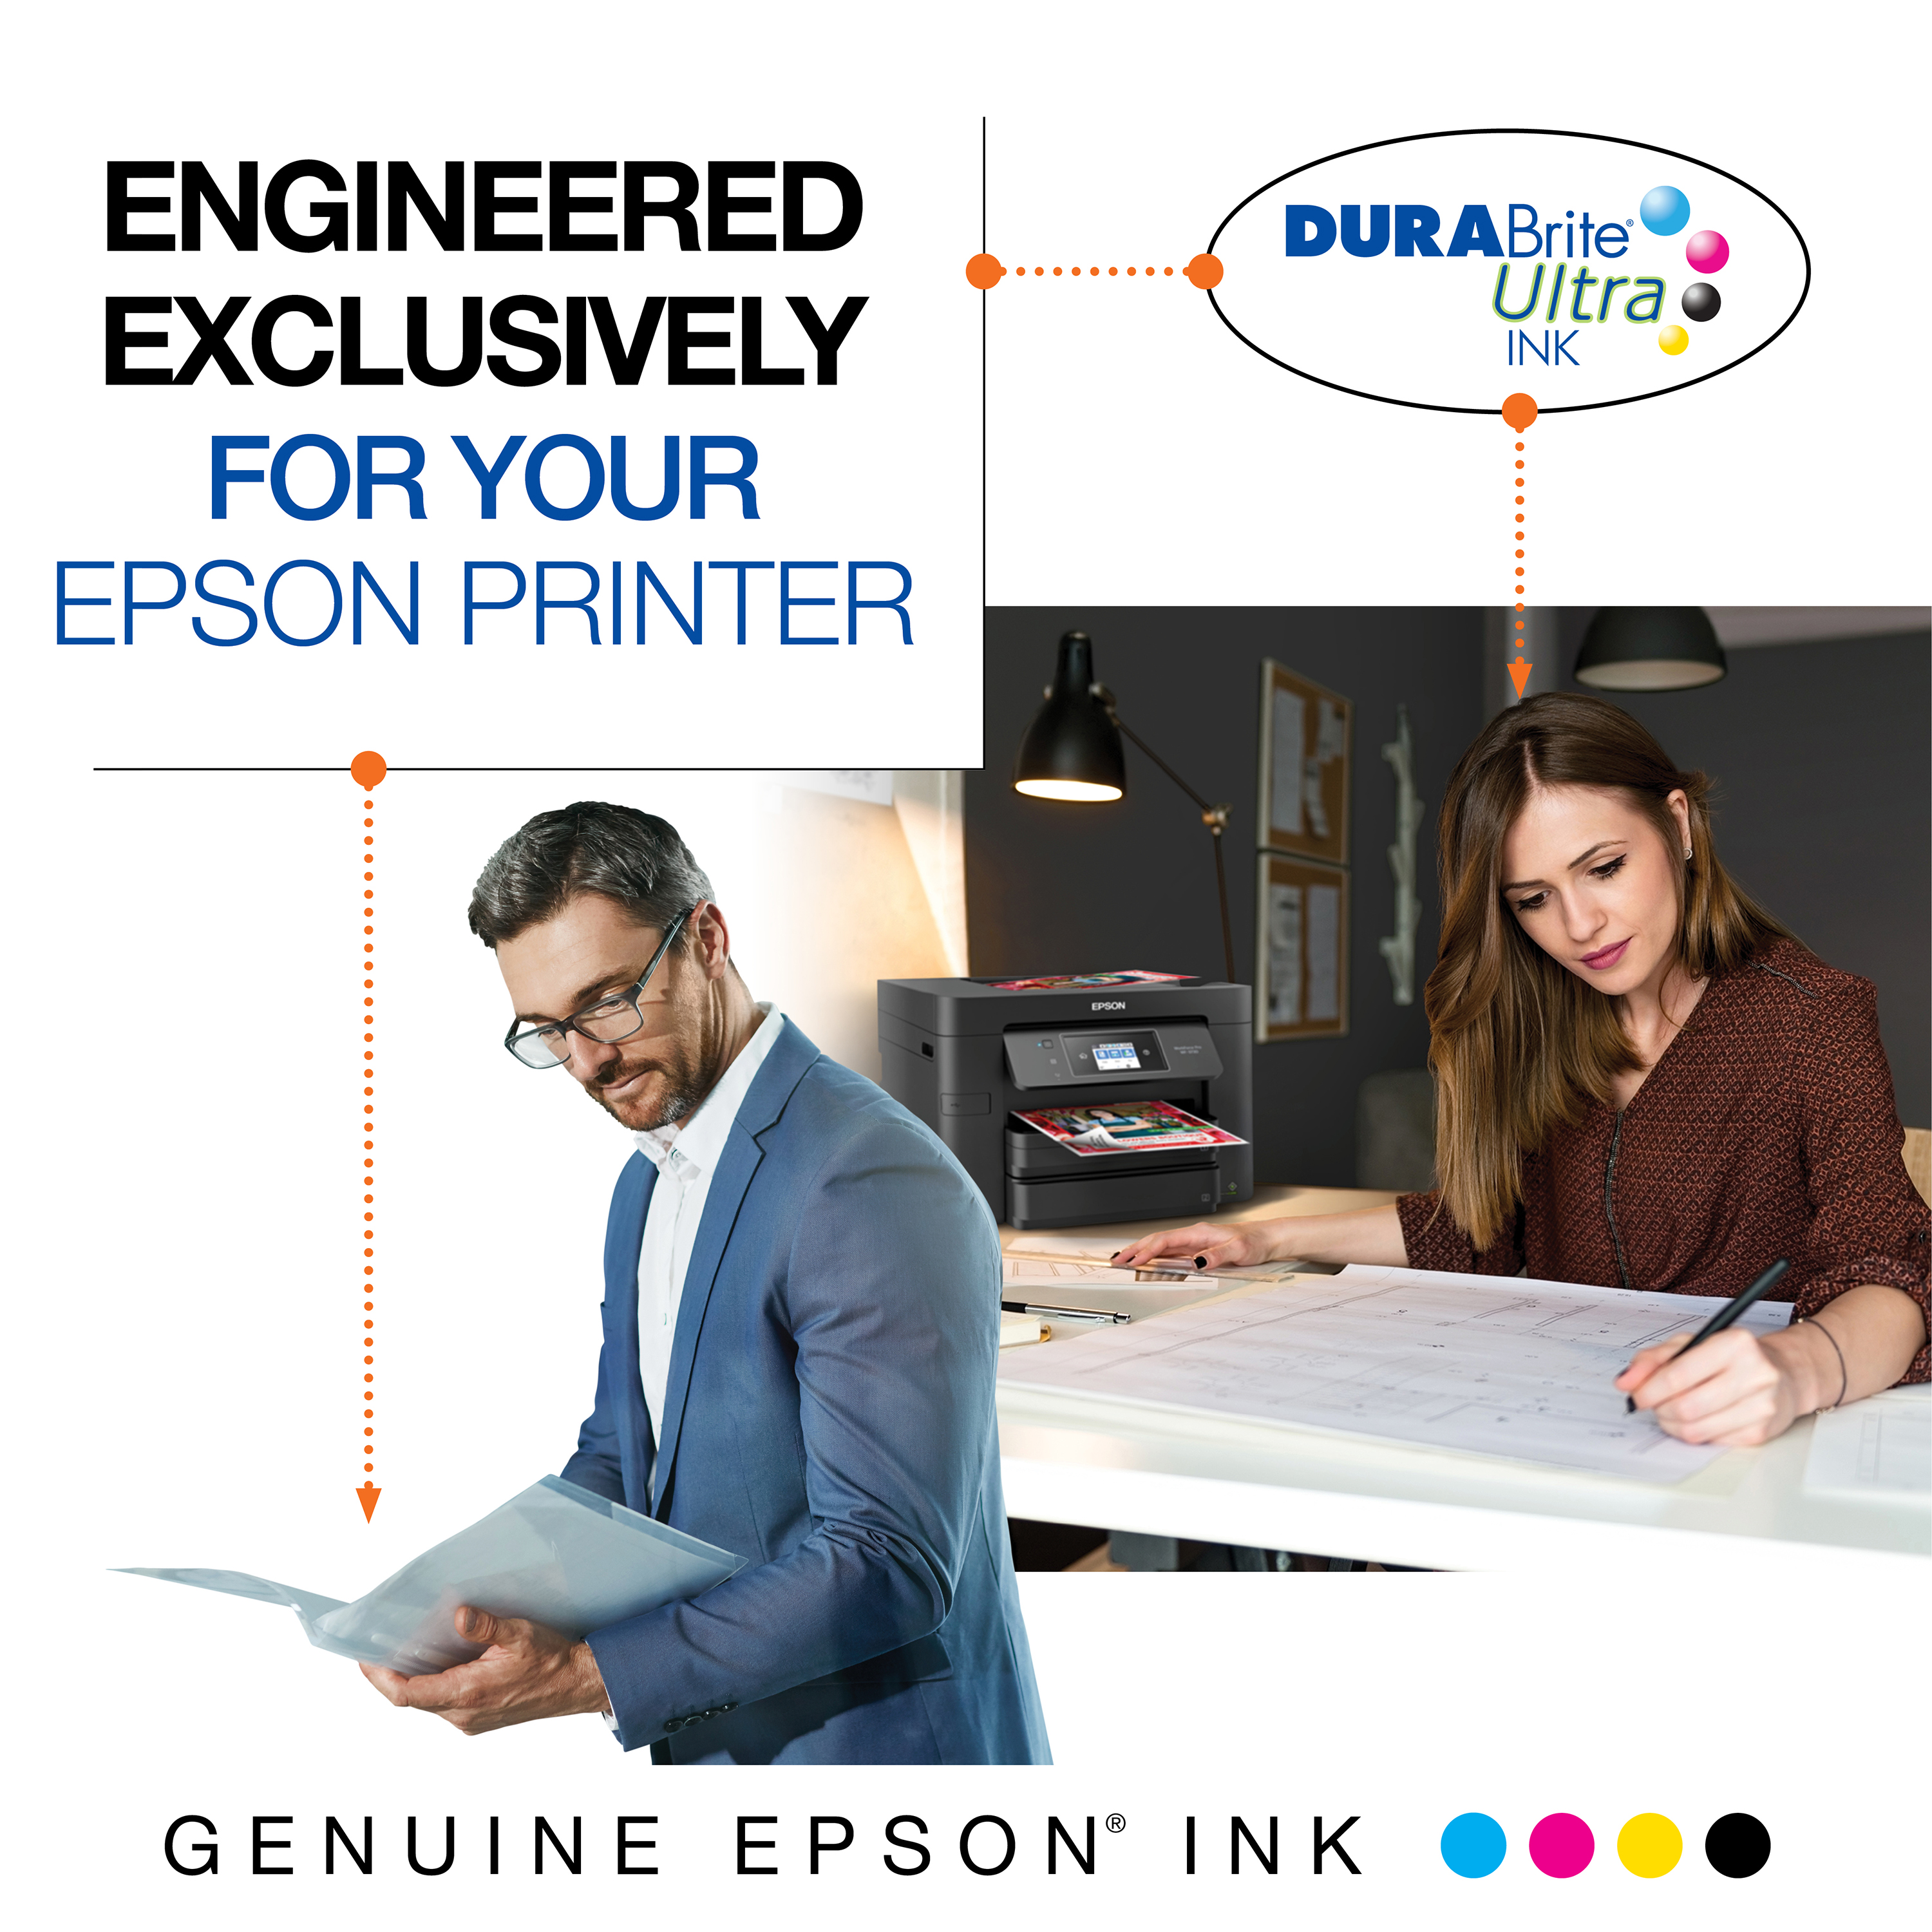 EPSON 127 DURABrite Ultra Ink Color Combo Pack For NX-530, NX-625,  WF-3520, WF-3530, WF-3540, WF-545, WF-60, WF-630, WF-633, WF-635, WF-645, WF-7010, WF-7510, WF-7520, WF-840, WF-845 - image 4 of 6